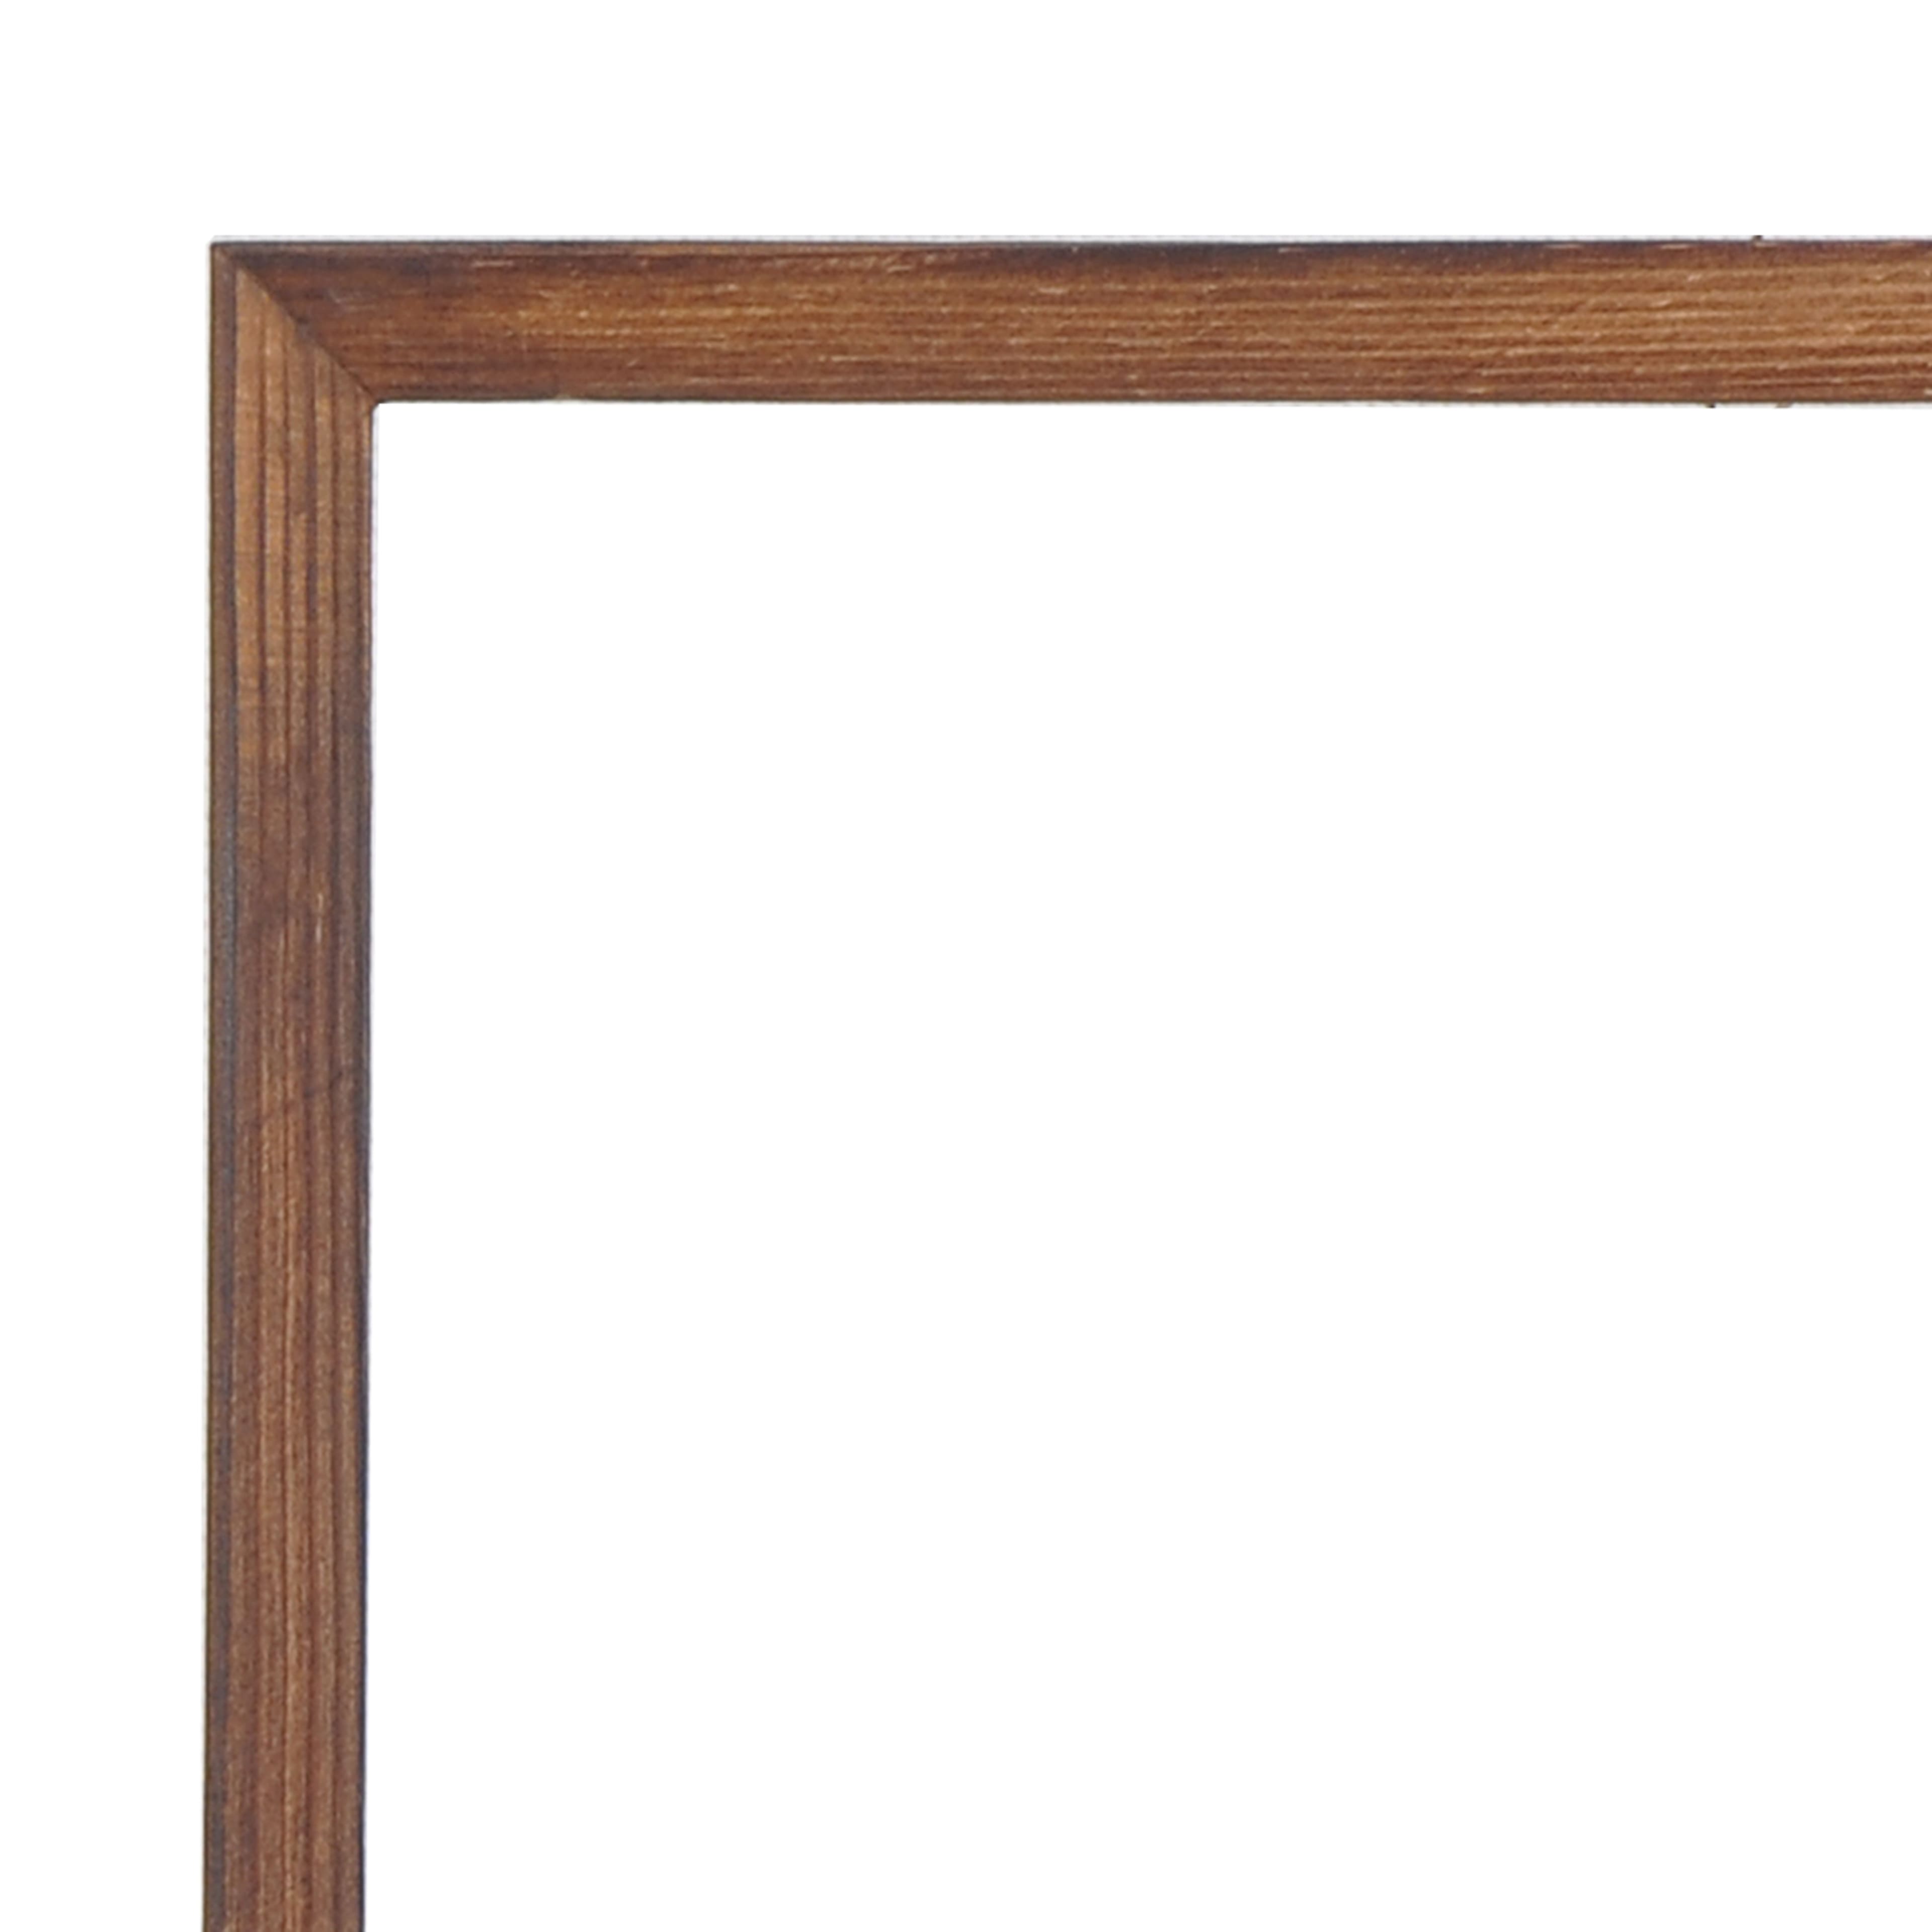 6 Pack: Dark Wood Frame with Mat, Gallery&#x2122; by Studio D&#xE9;cor&#xAE;